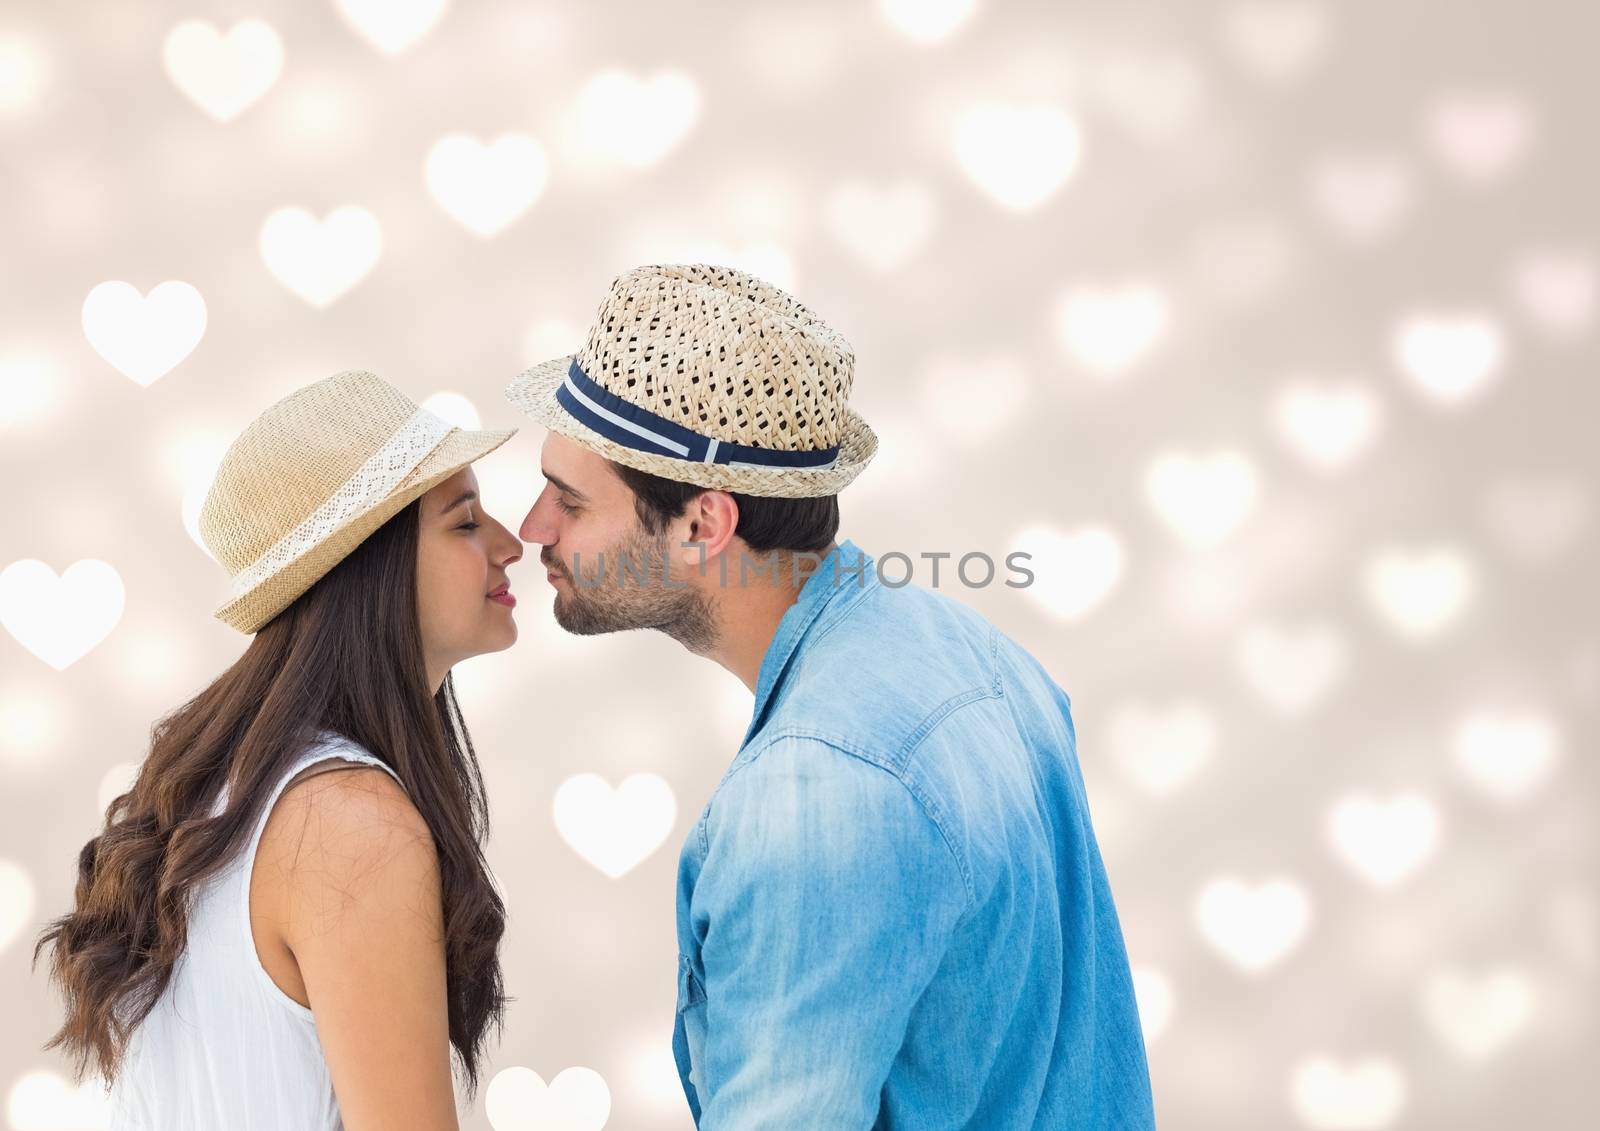 Romantic couple kissing each other against digitally generated heart background